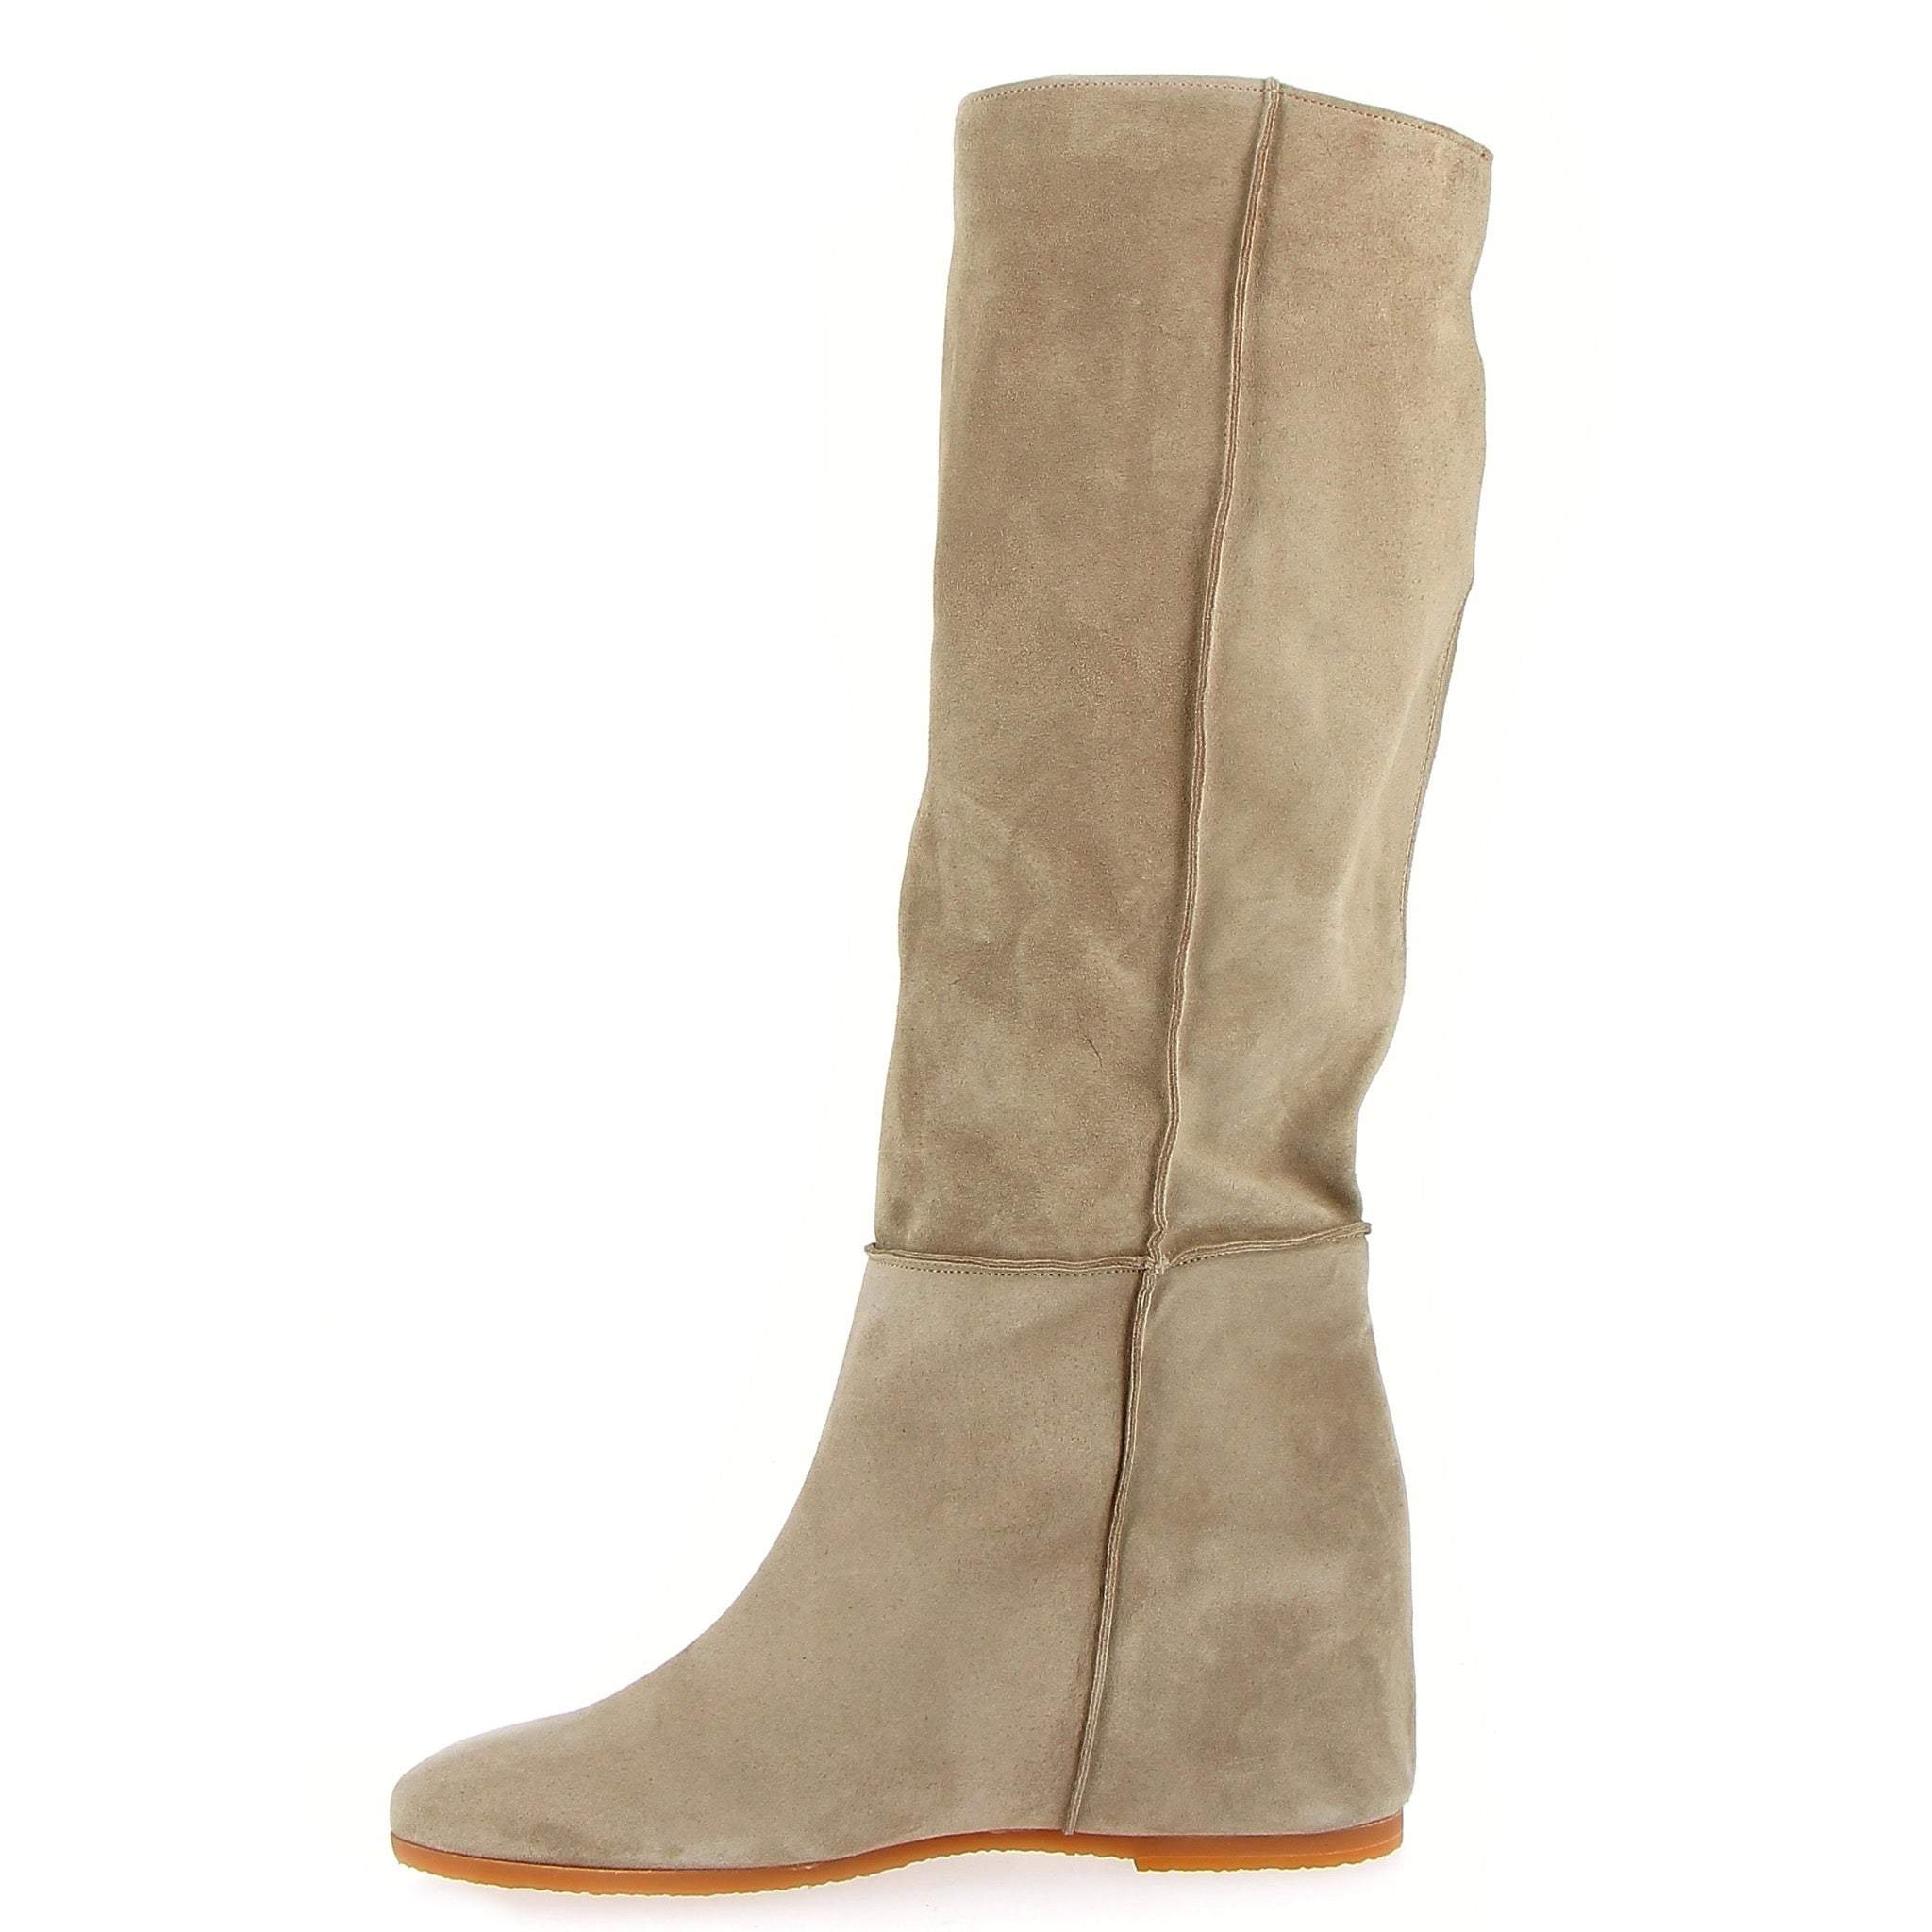 Sand suede unlined tube boot